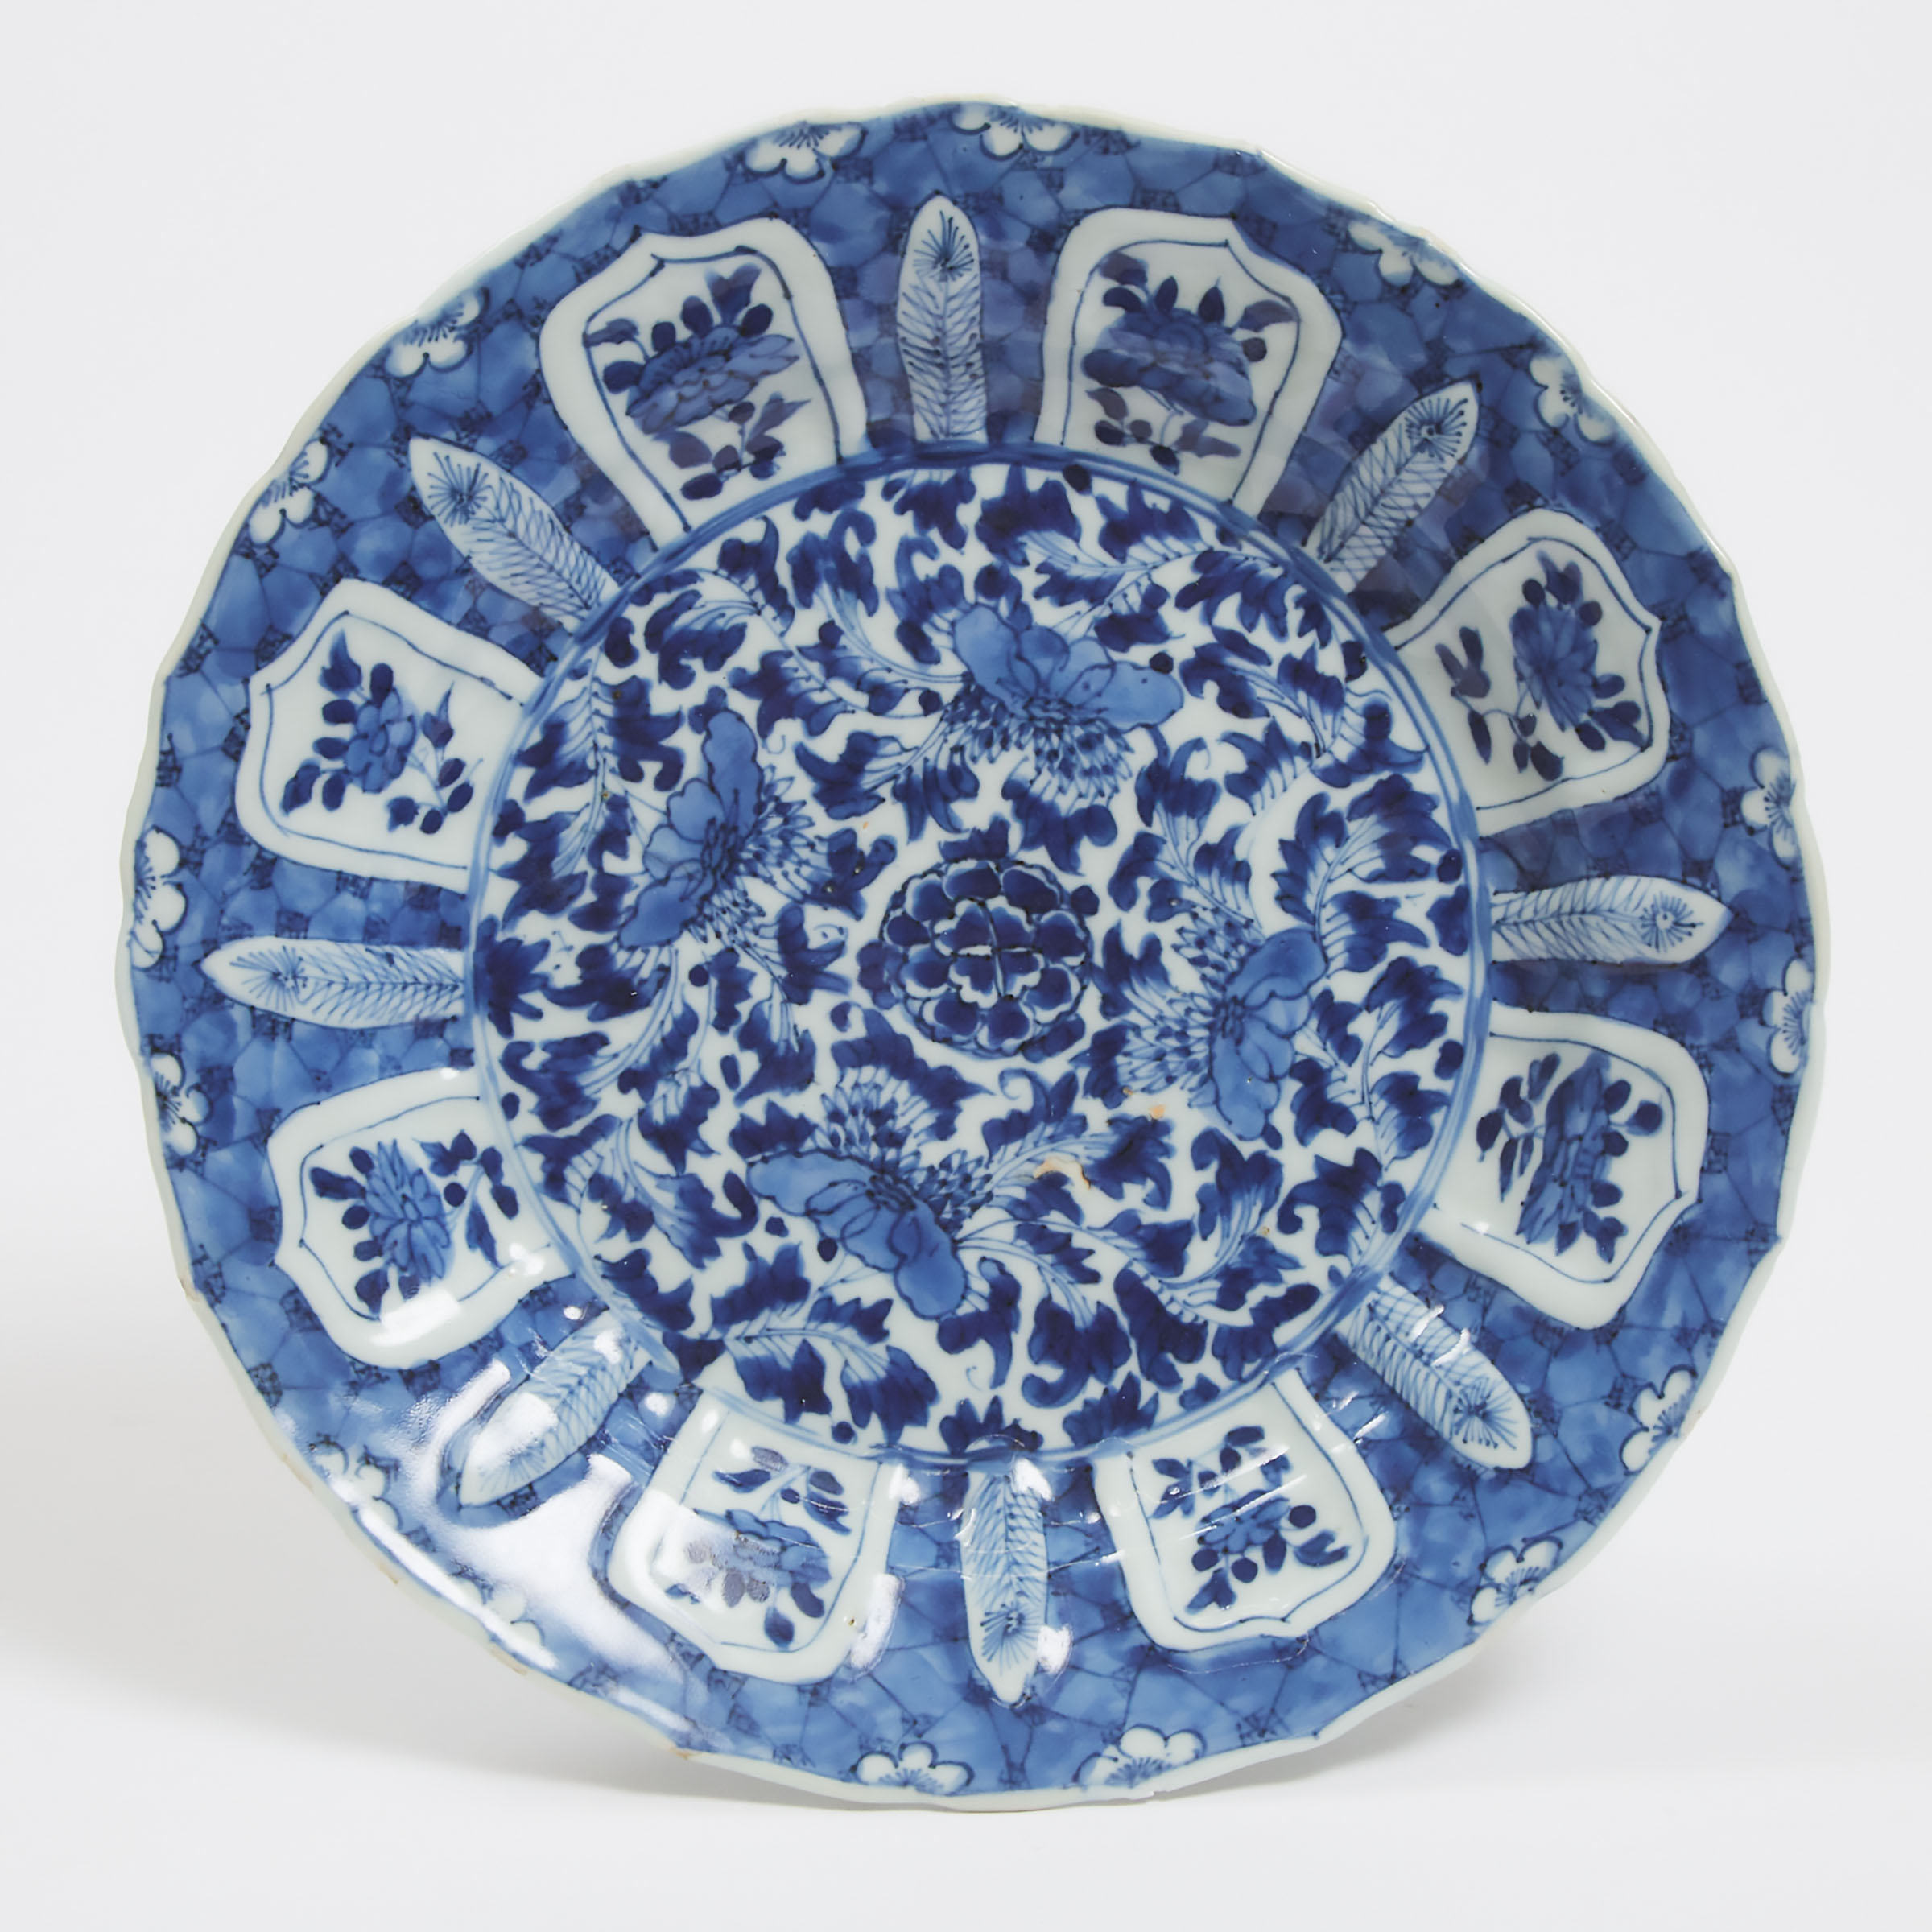 A Moulded Blue and White Barbed-Rim Dish, Kangxi Period (1662-1722)